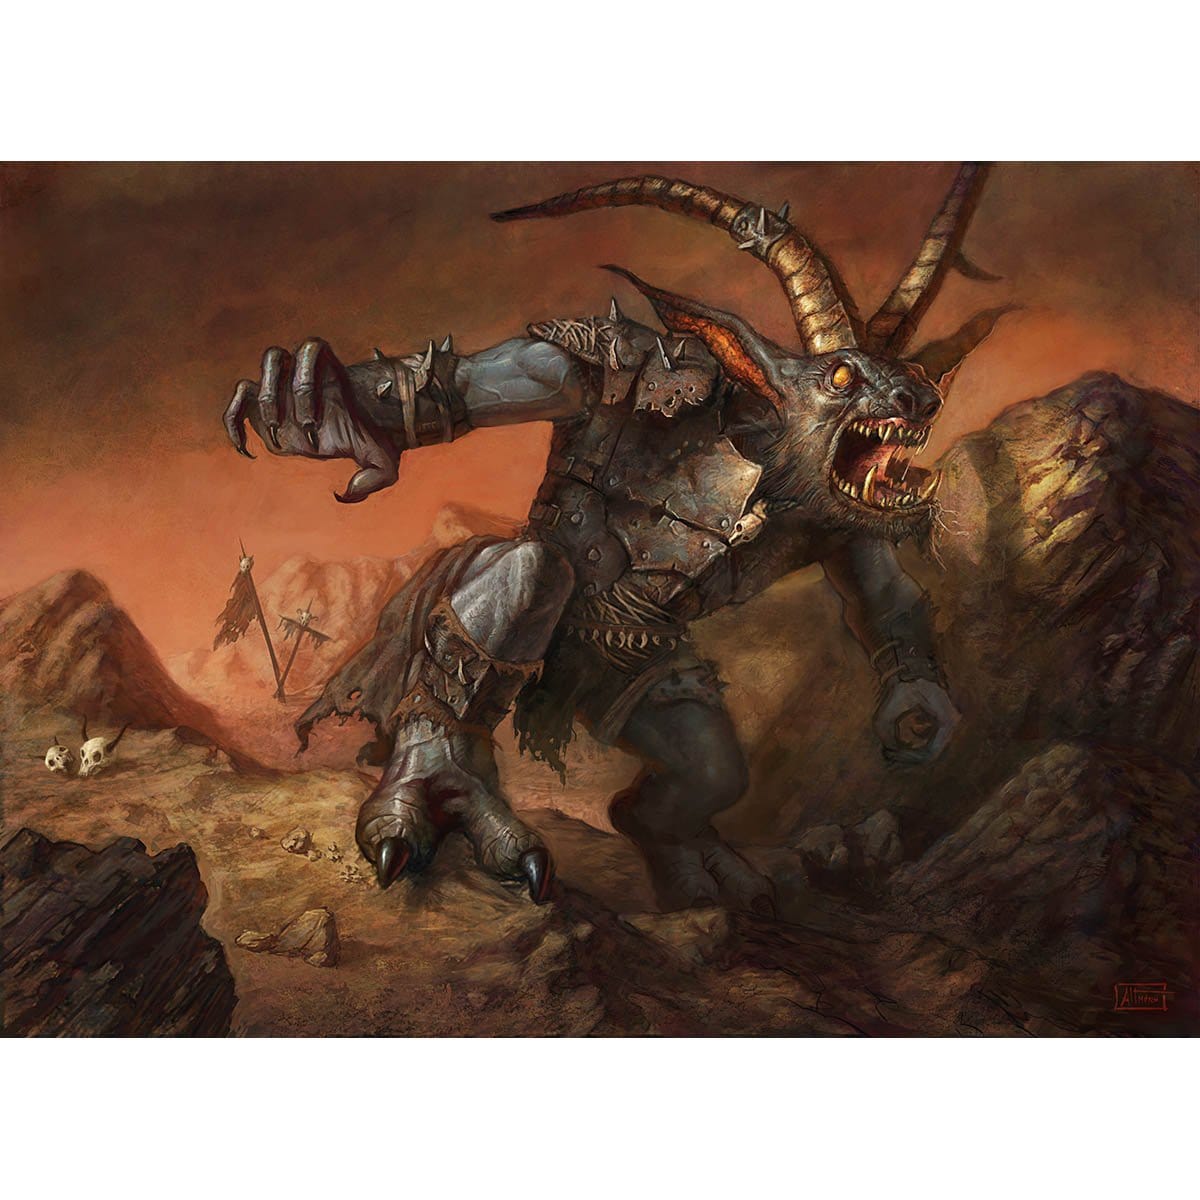 Scuzzback Scrapper Print - Print - Original Magic Art - Accessories for Magic the Gathering and other card games